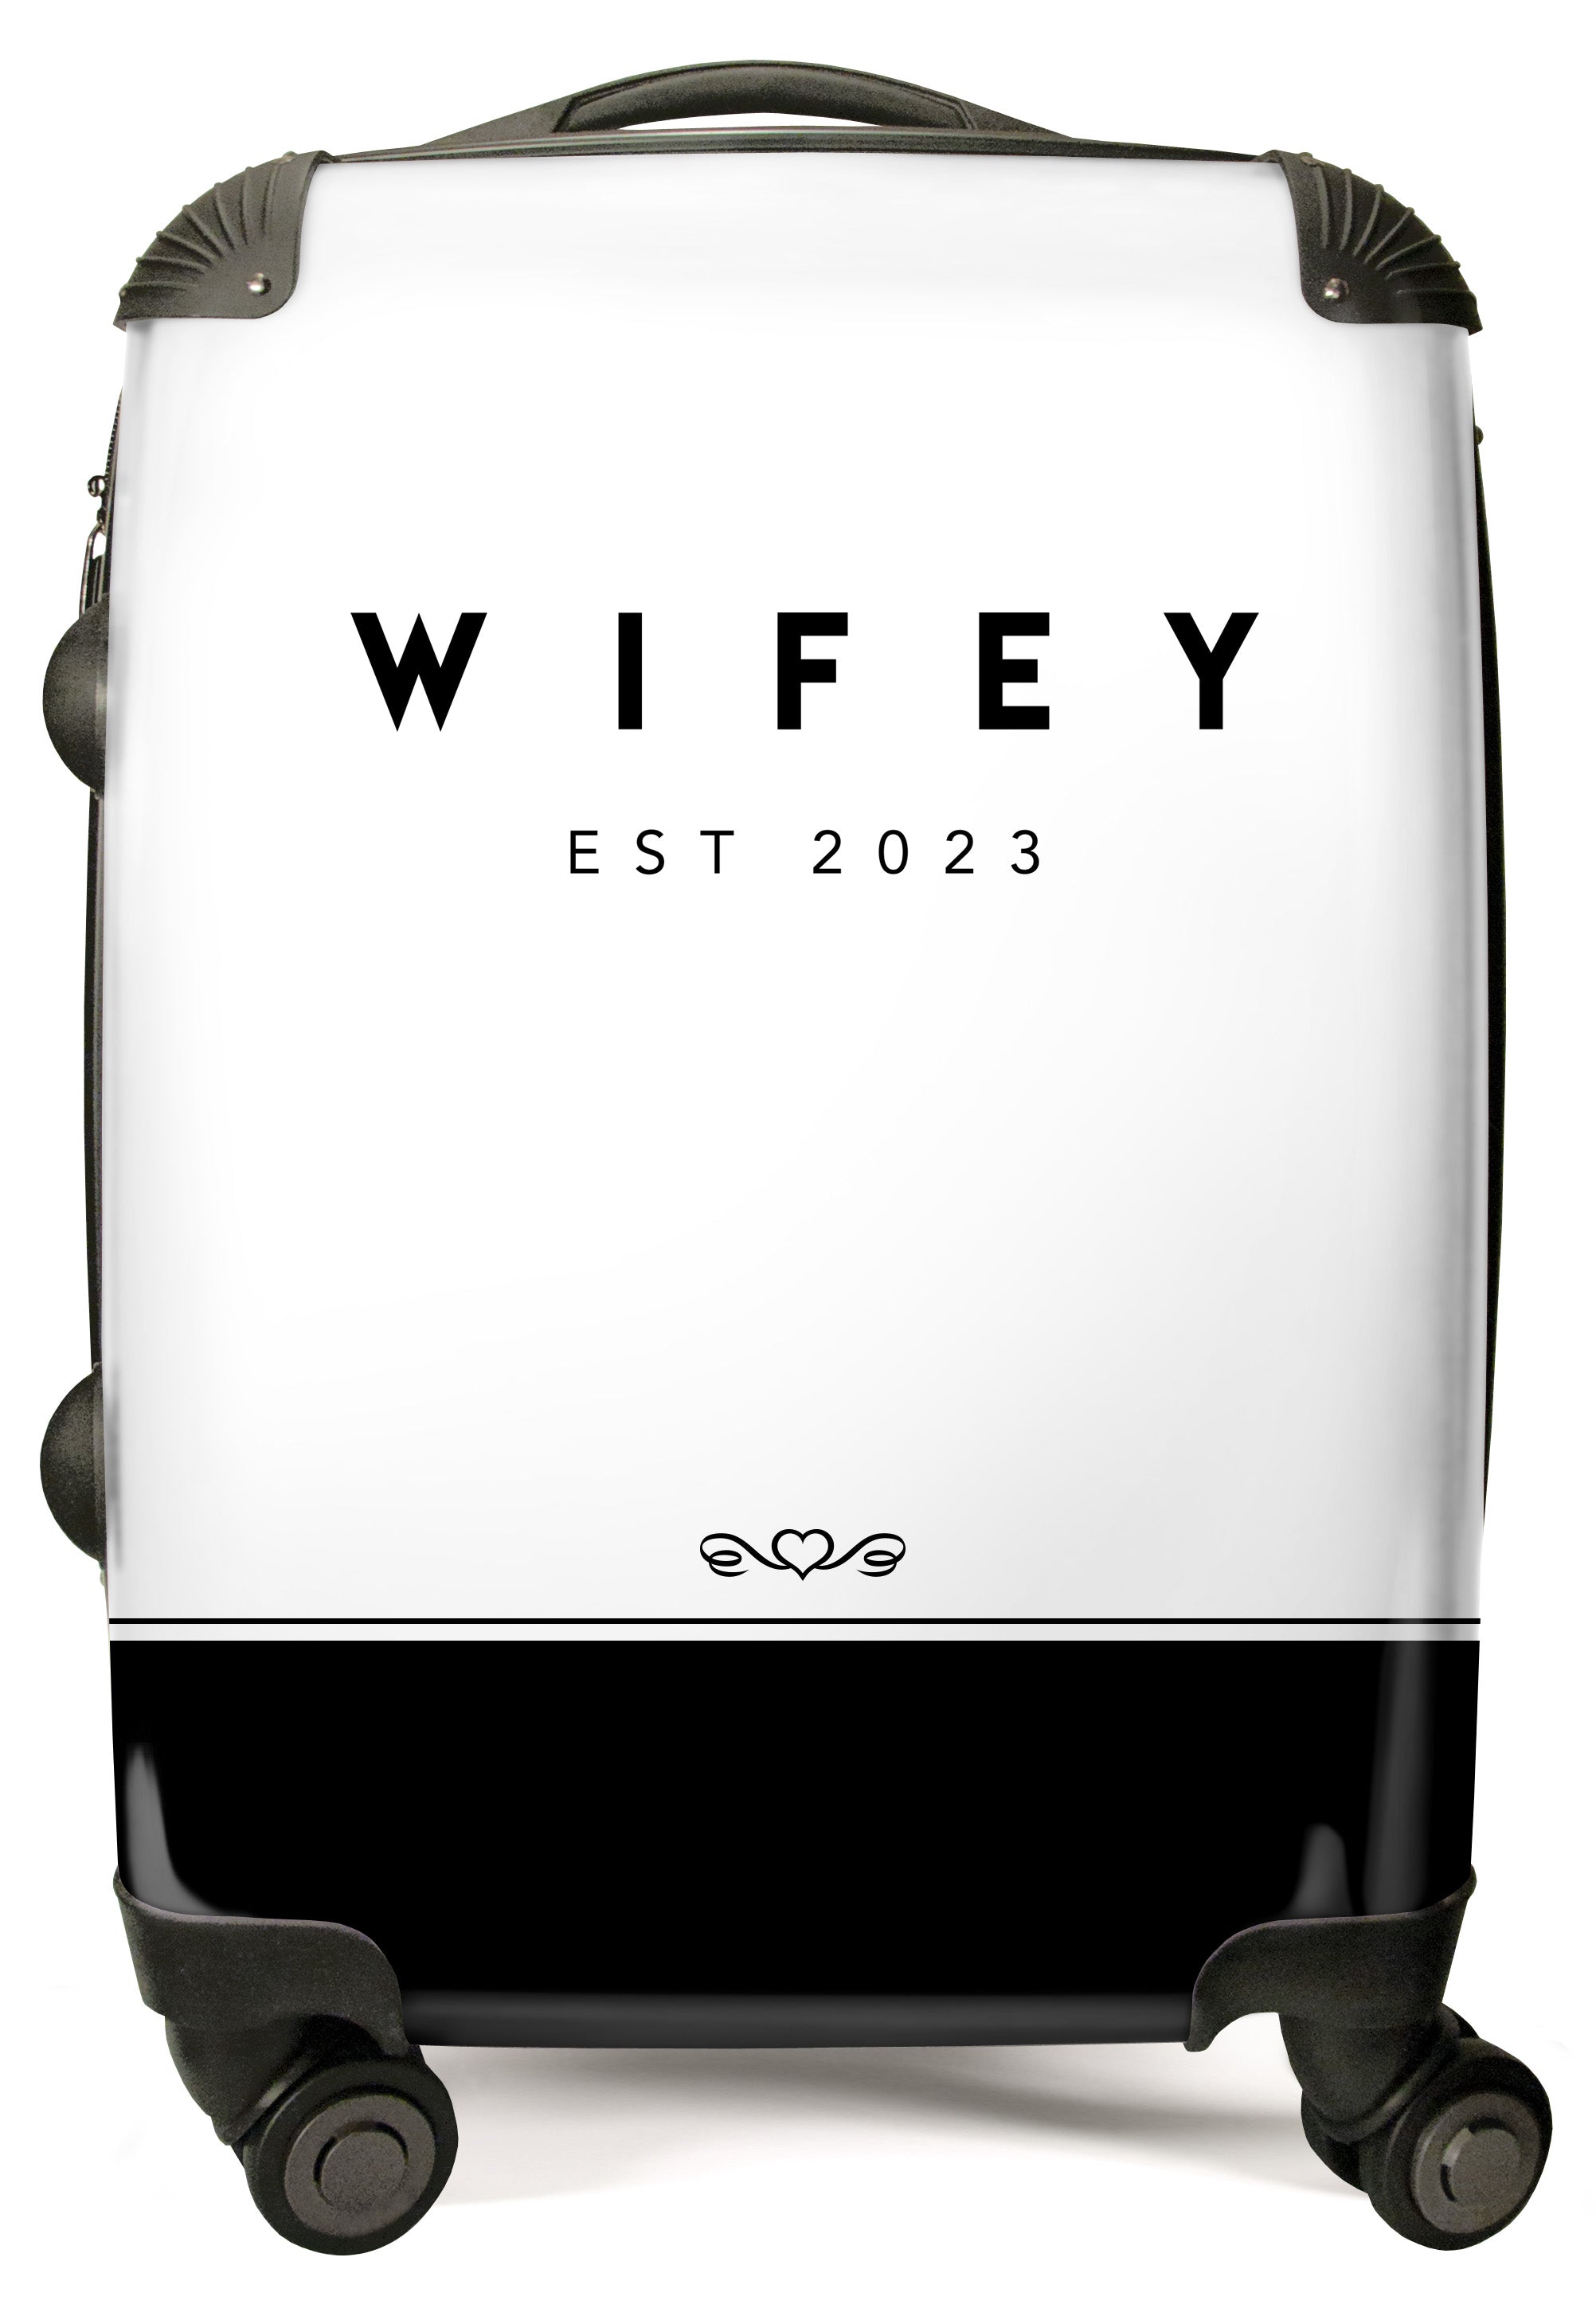 PERSONALIZED WHITE AND BLACK WIFEY PRINT SUITCASE